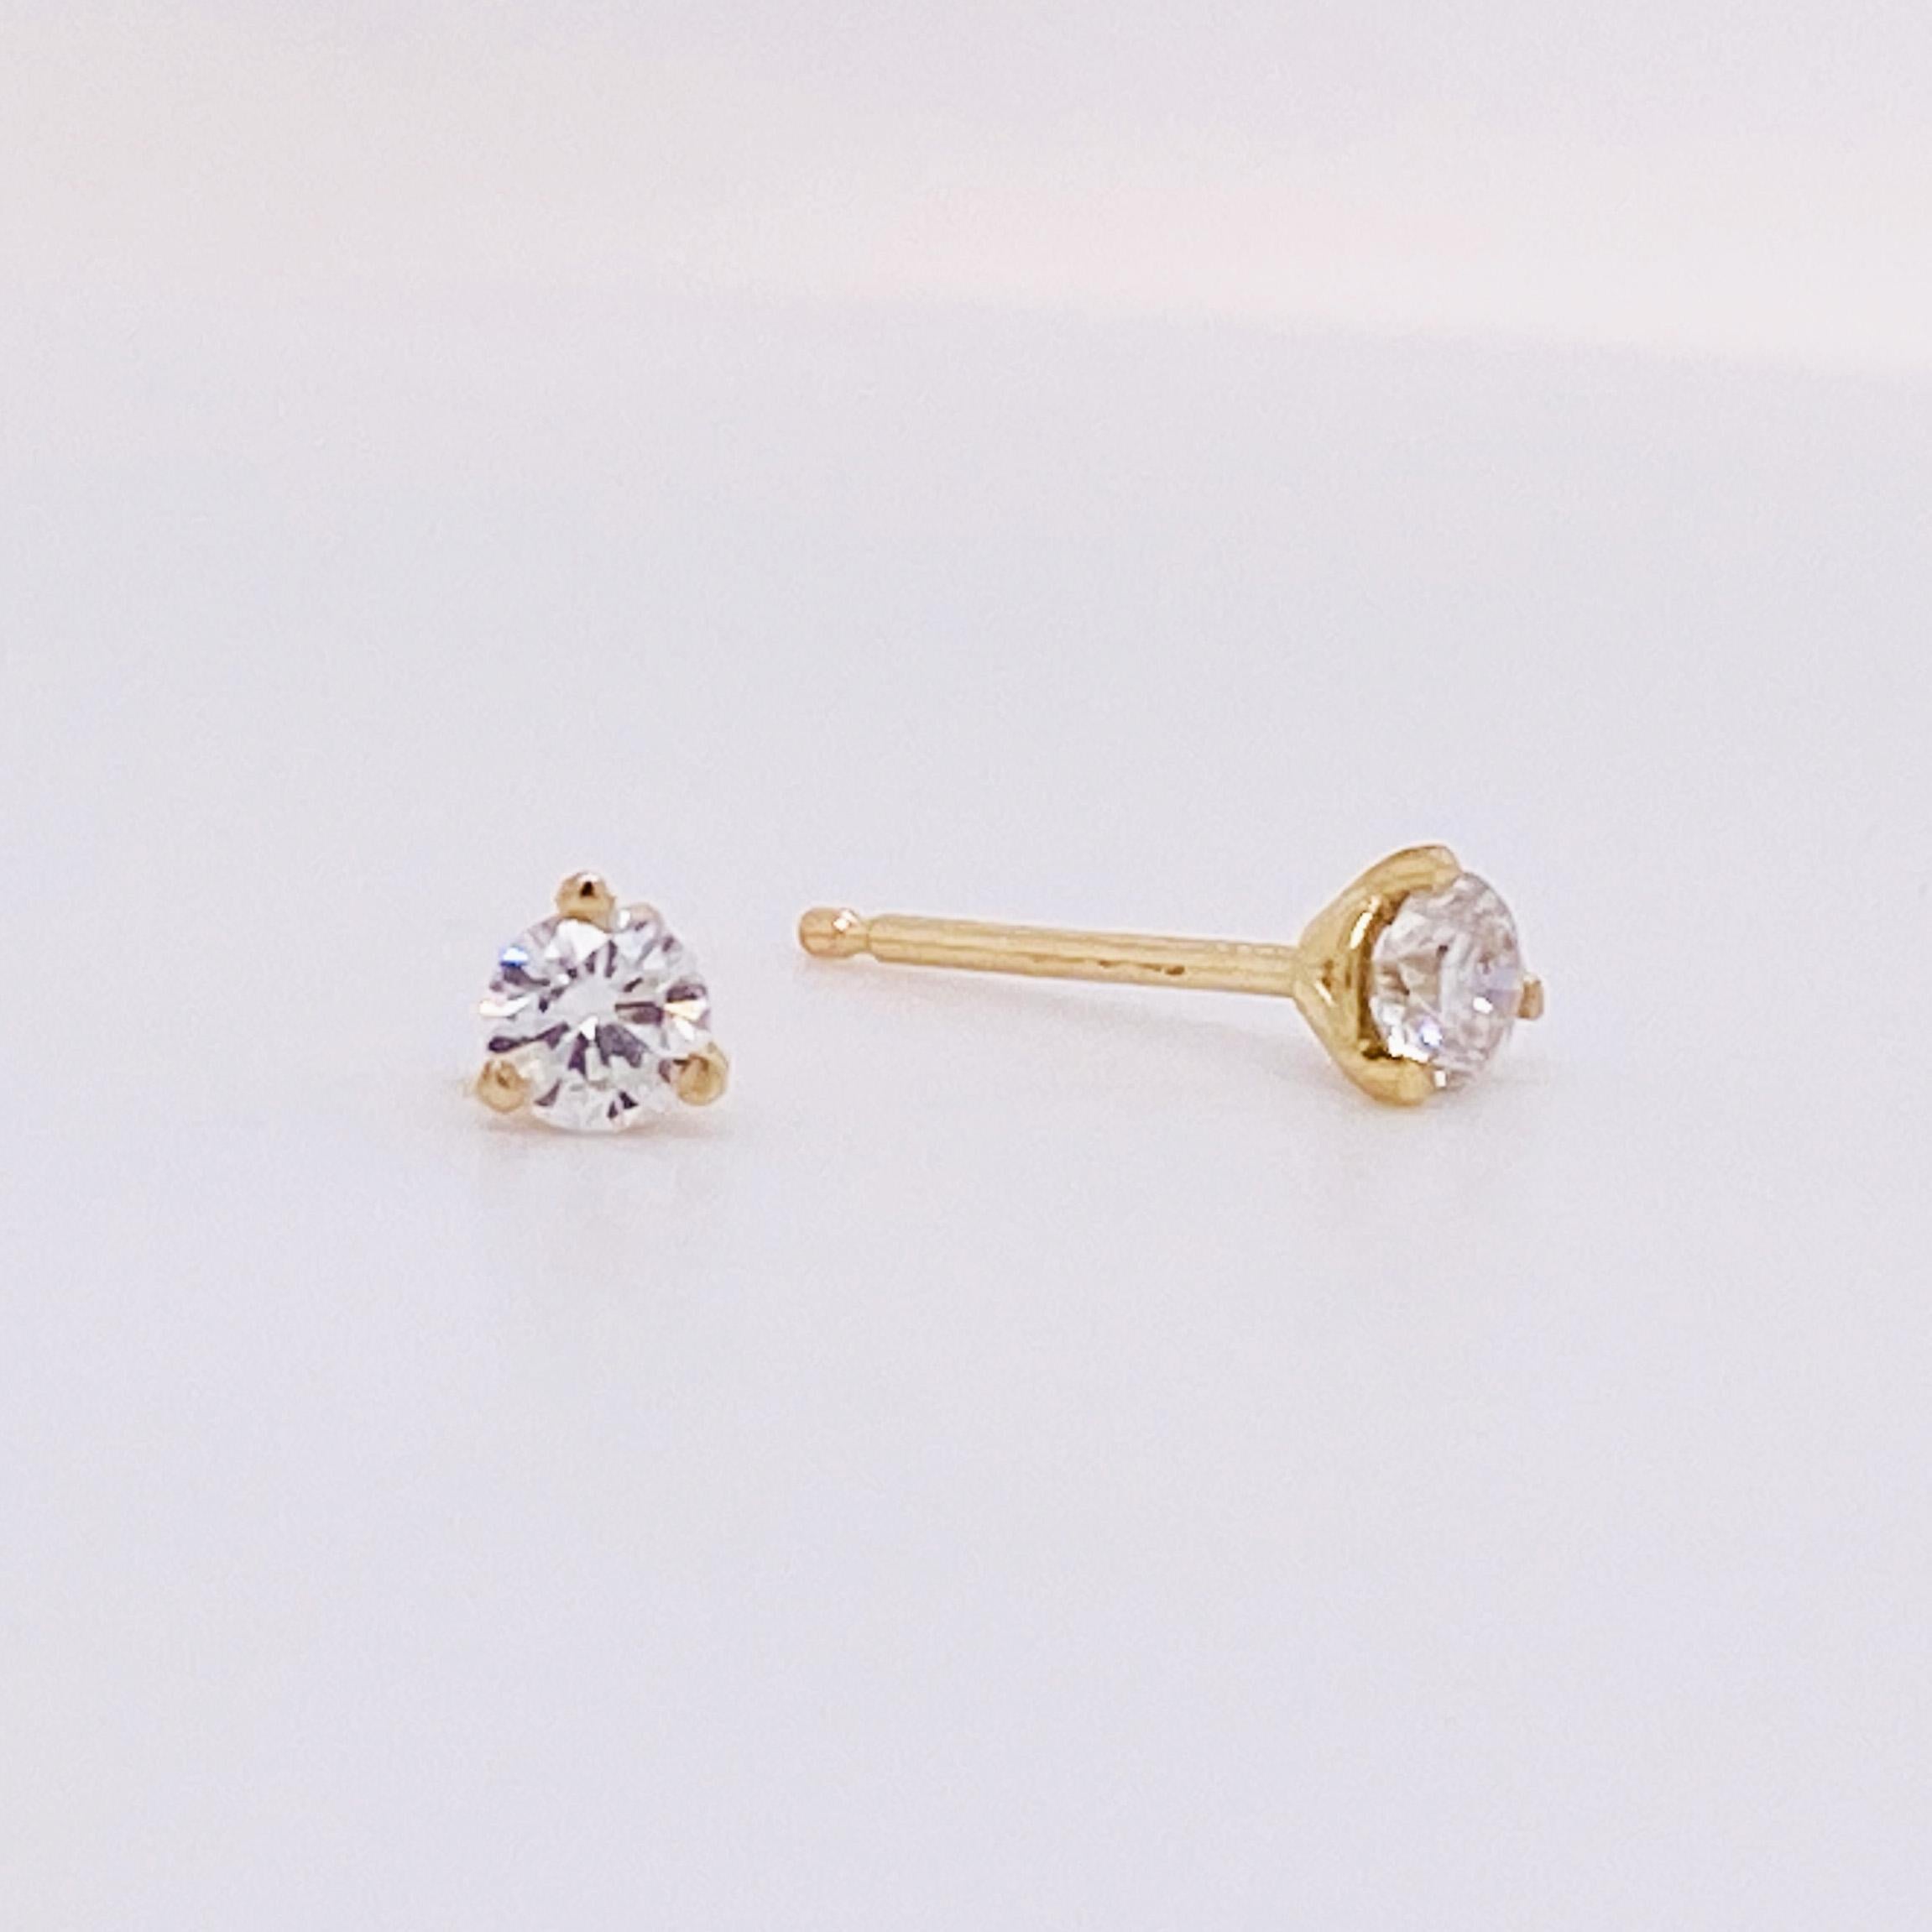 These petite martini stud earrings are the perfect accent for any ear! These are beautiful alone or worn as an accent next to larger earrings! Martini studs are popular because they have a low profile close to the ear yet keep the stone proudly